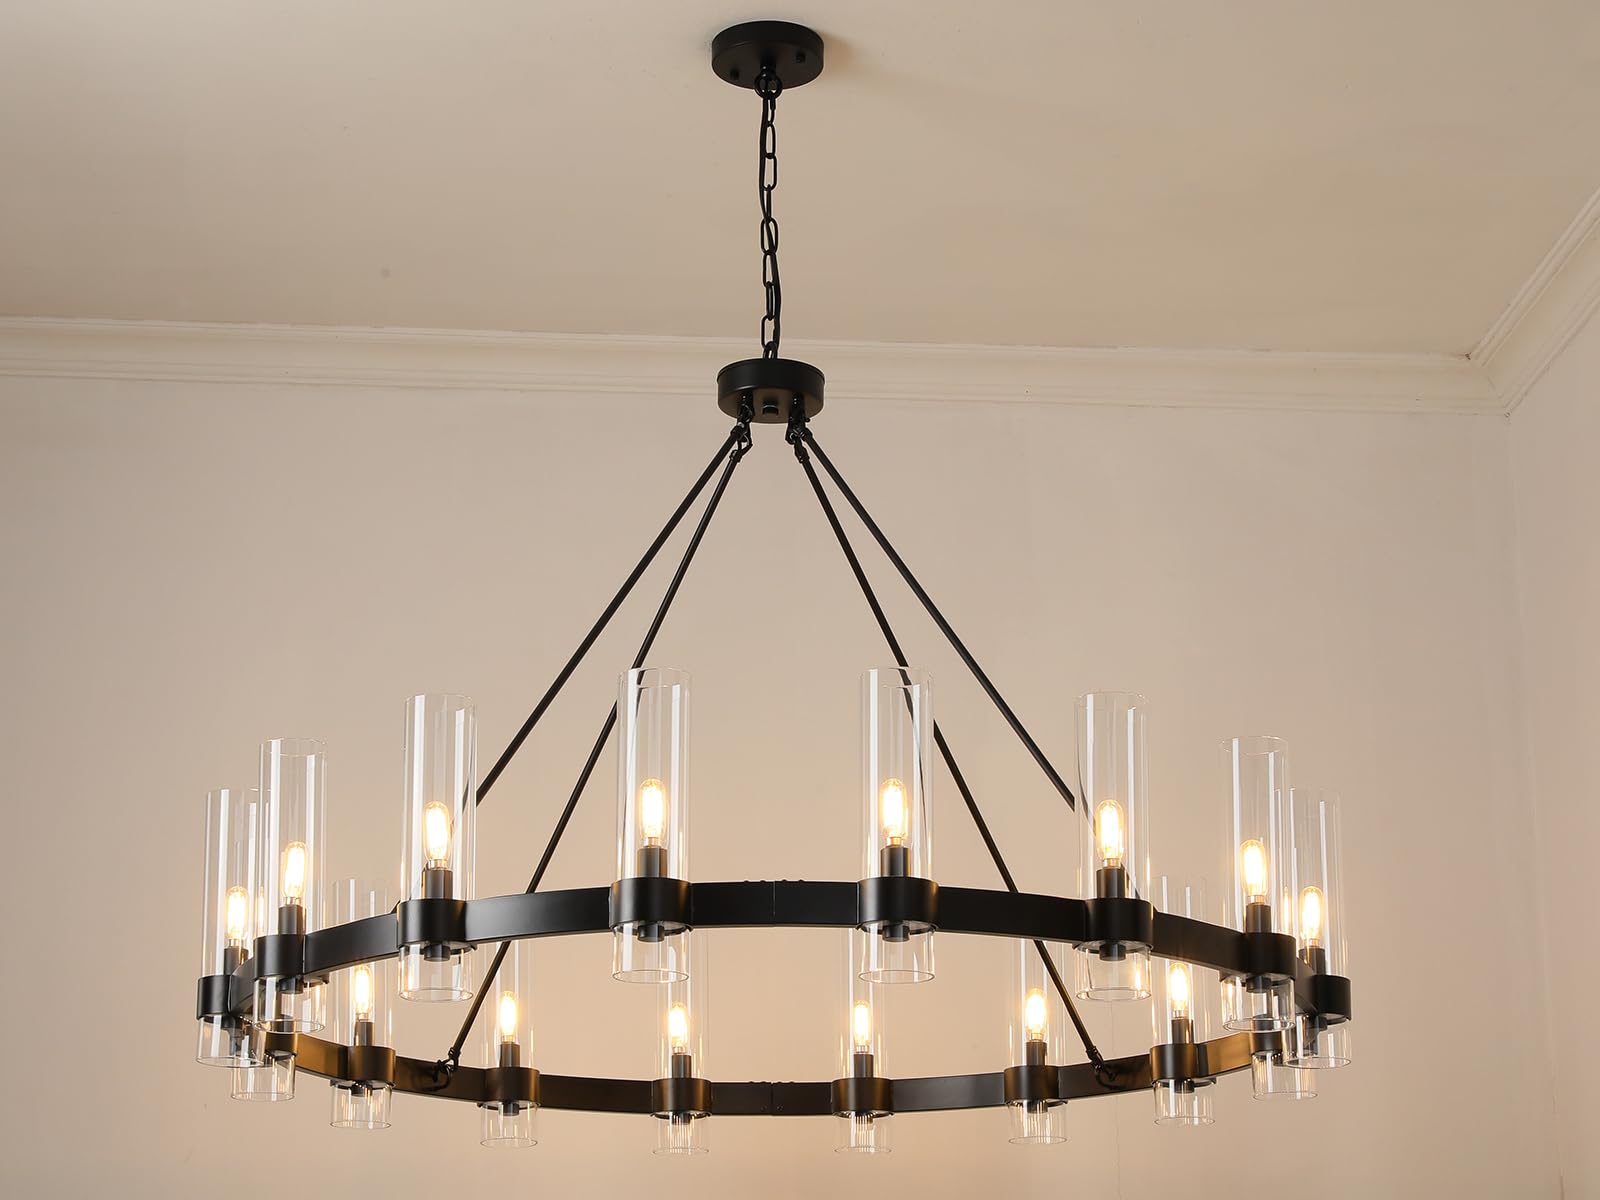 16-Lights Black Chandelier,Wagon Wheel Chandelier with Glass Shade,48 Inch Large Round Industrial High Ceilings Pendant Lighting Fixture for Dining Living Room, Kitchen Island, Foyer